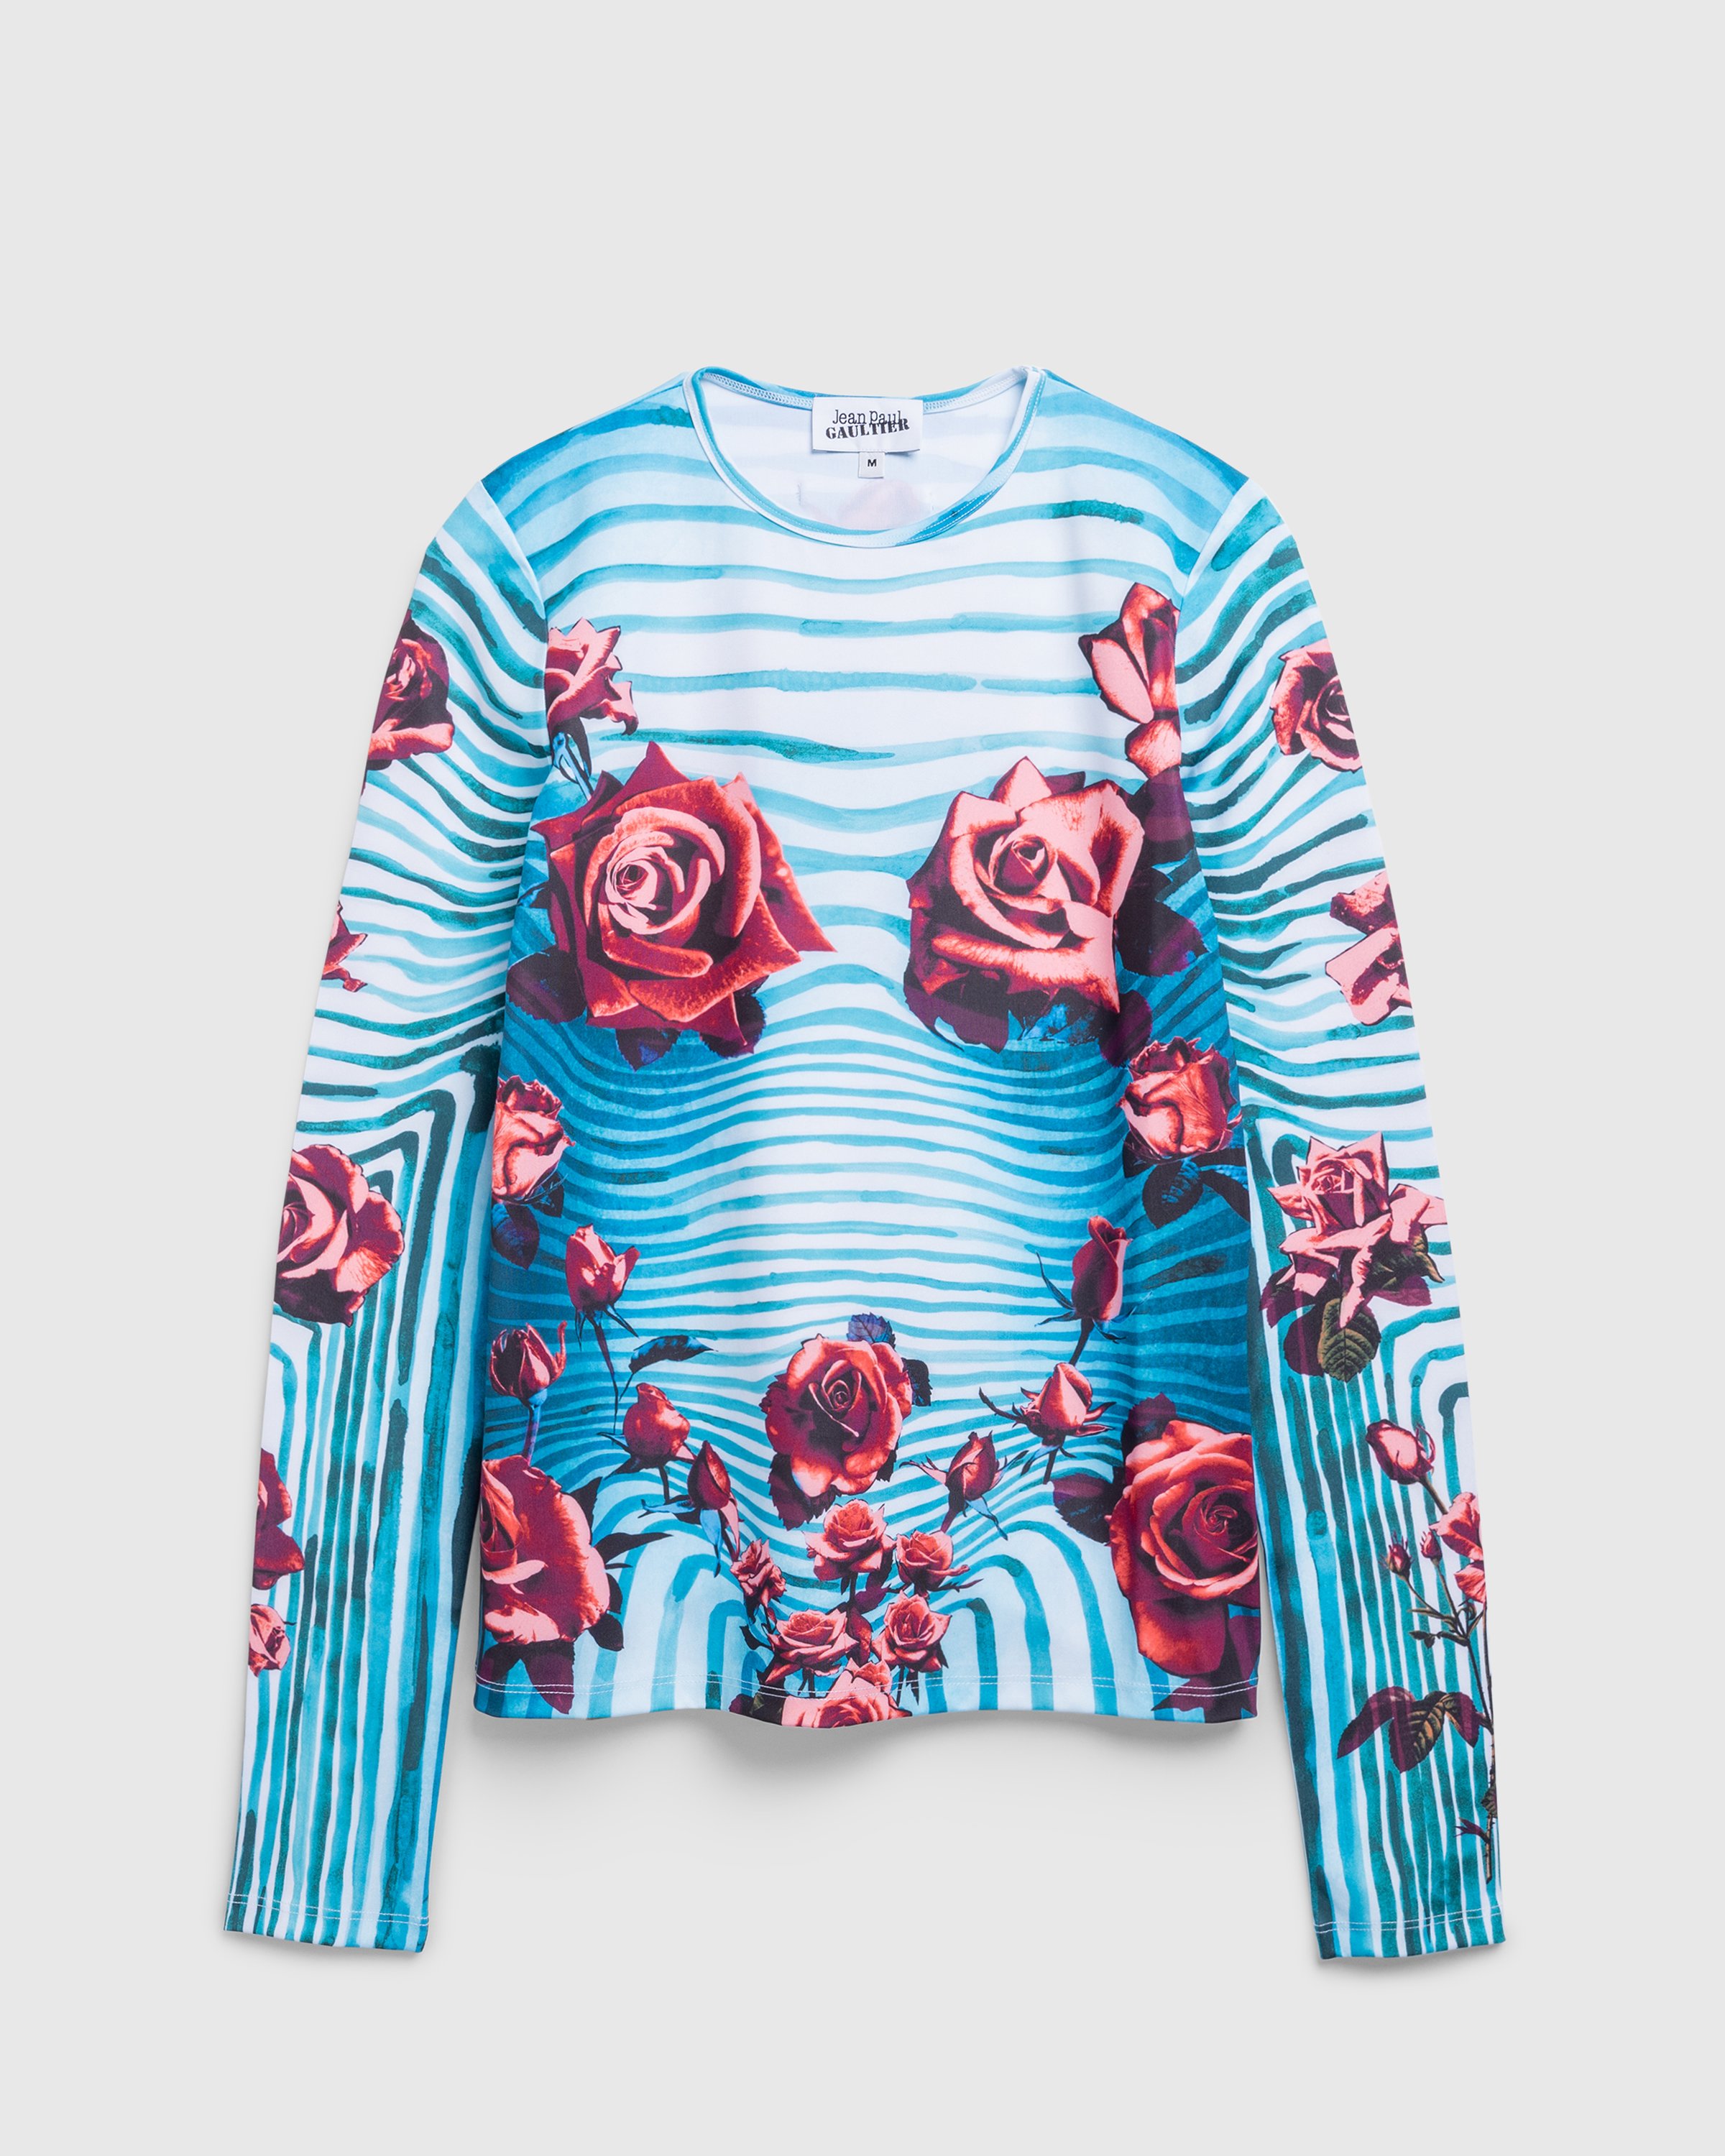 Jean Paul Gaultier - Jersey Long Sleeves Top Printed Flower Body Morphing Blue/Red/White - Clothing - Multi - Image 1